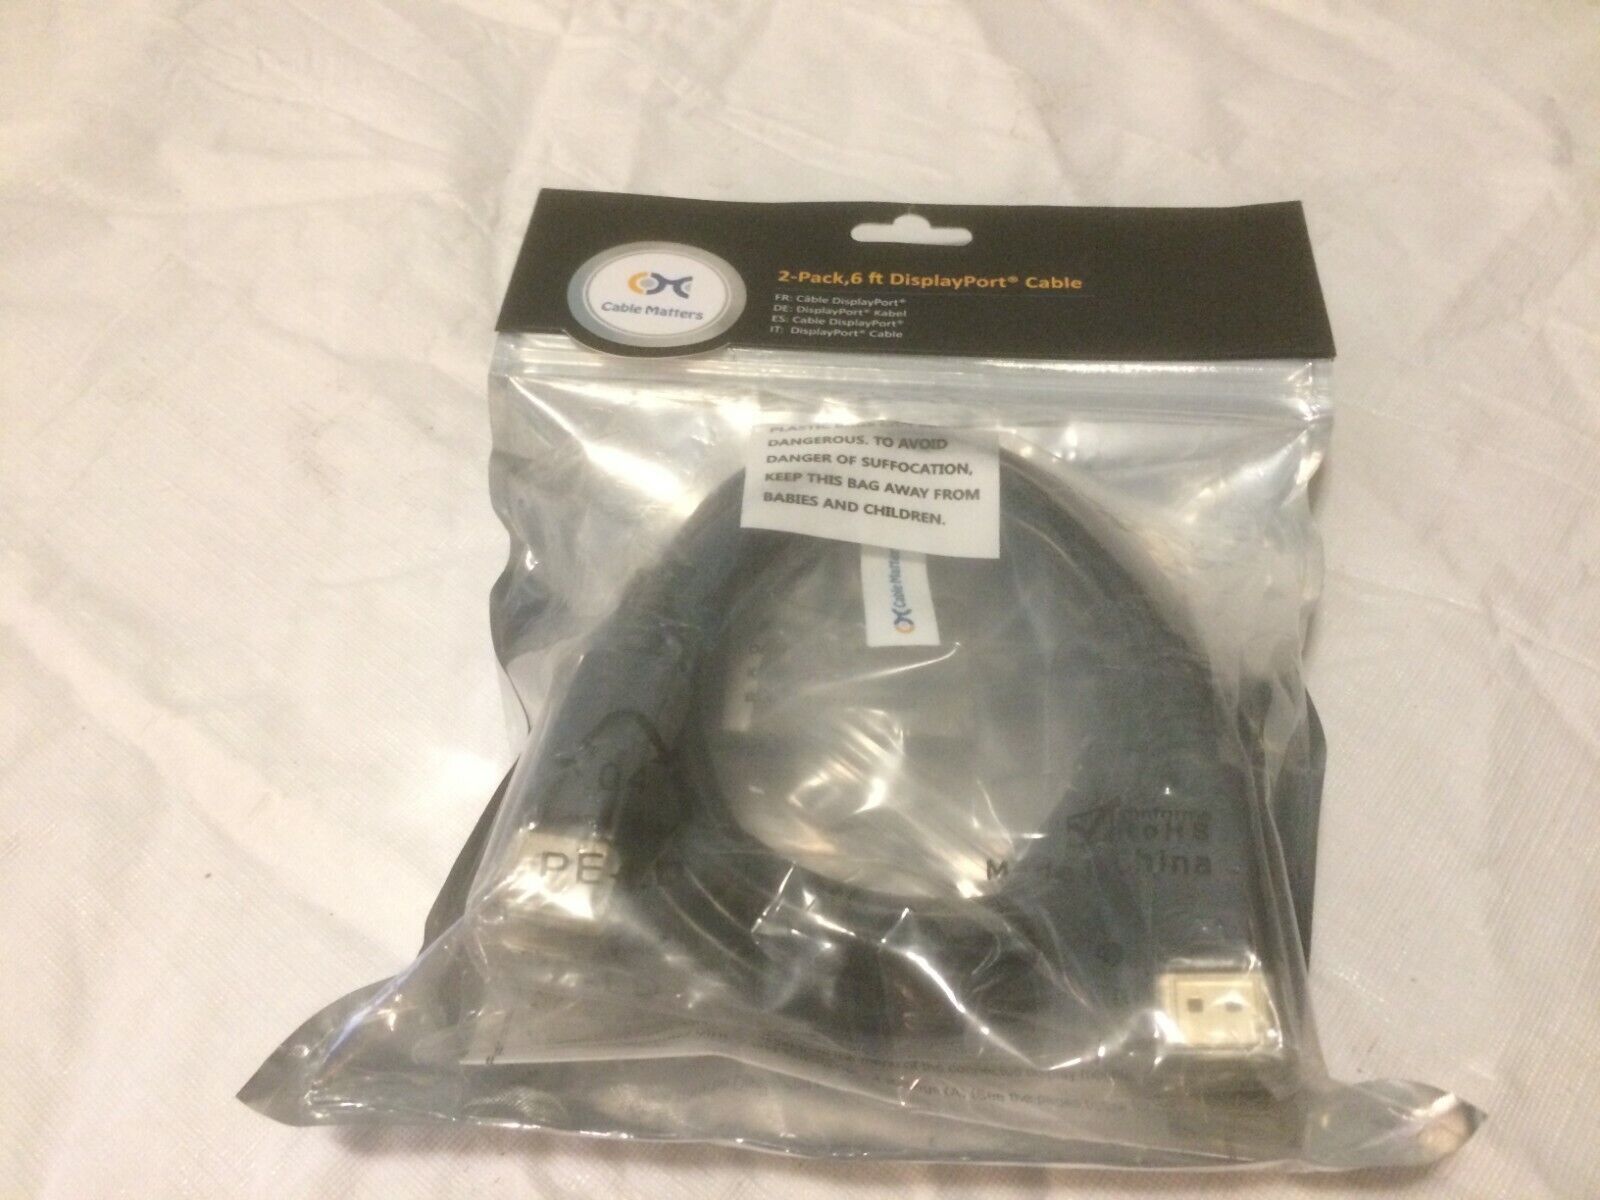 Cable Matters 2 Pack 6 Foot Displayport Cable New in unopened package